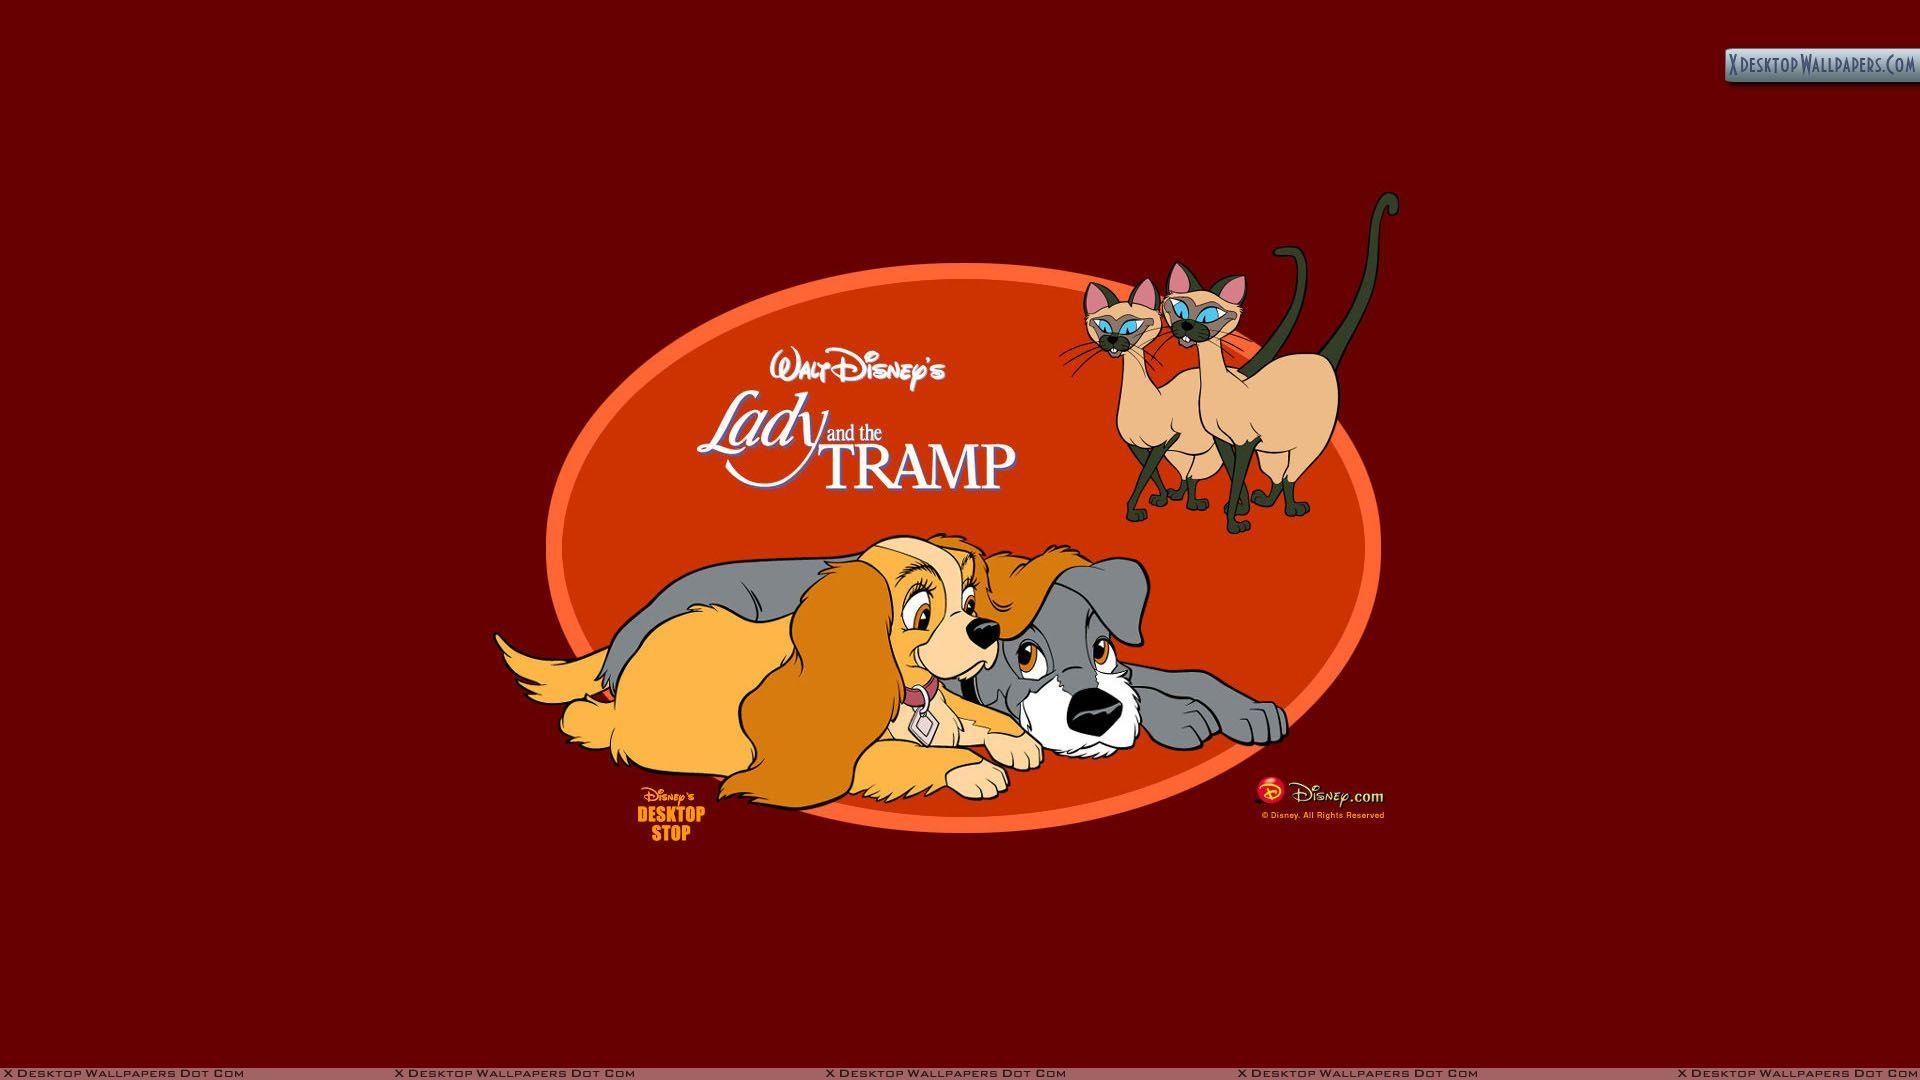 Lady And The Tramp Wallpaper, Photo & Image in HD